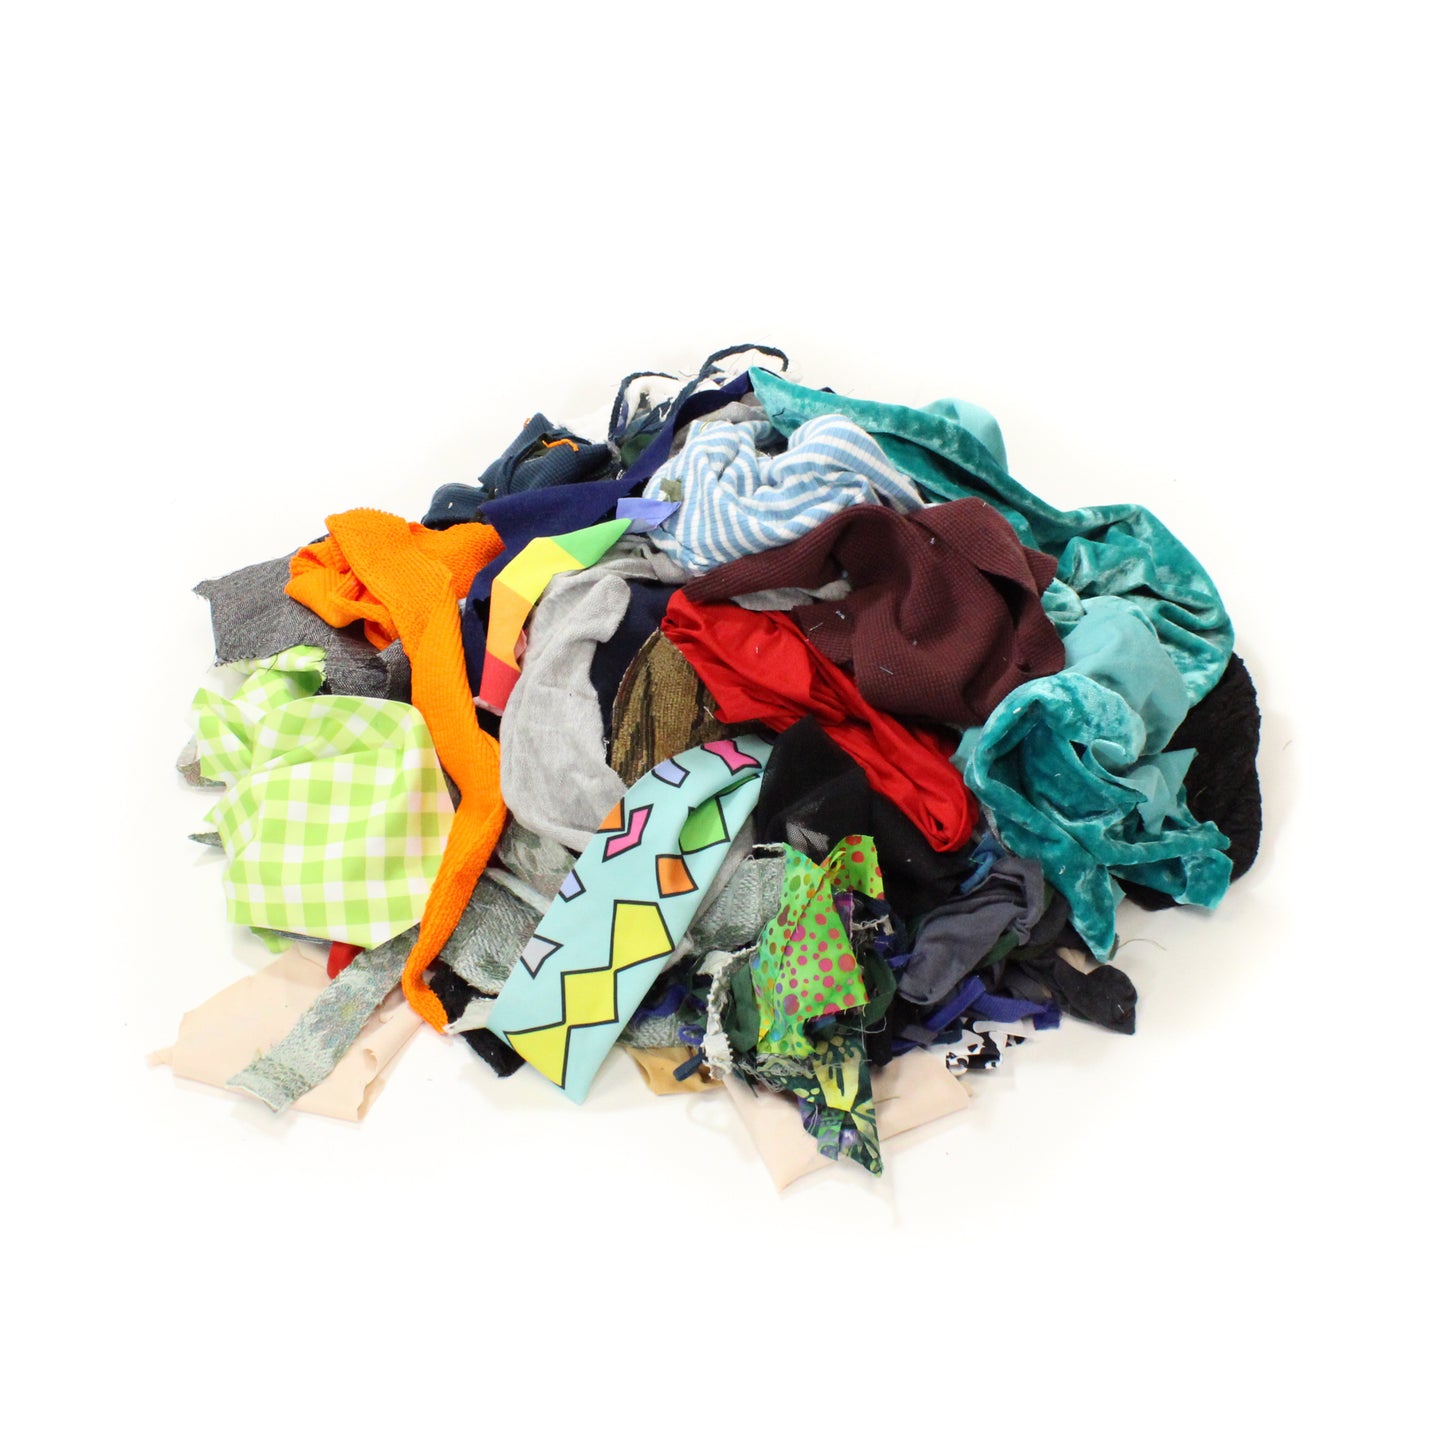 5 LBS UNSORTED FABRIC SCRAP - PAY WHAT YOU WISH